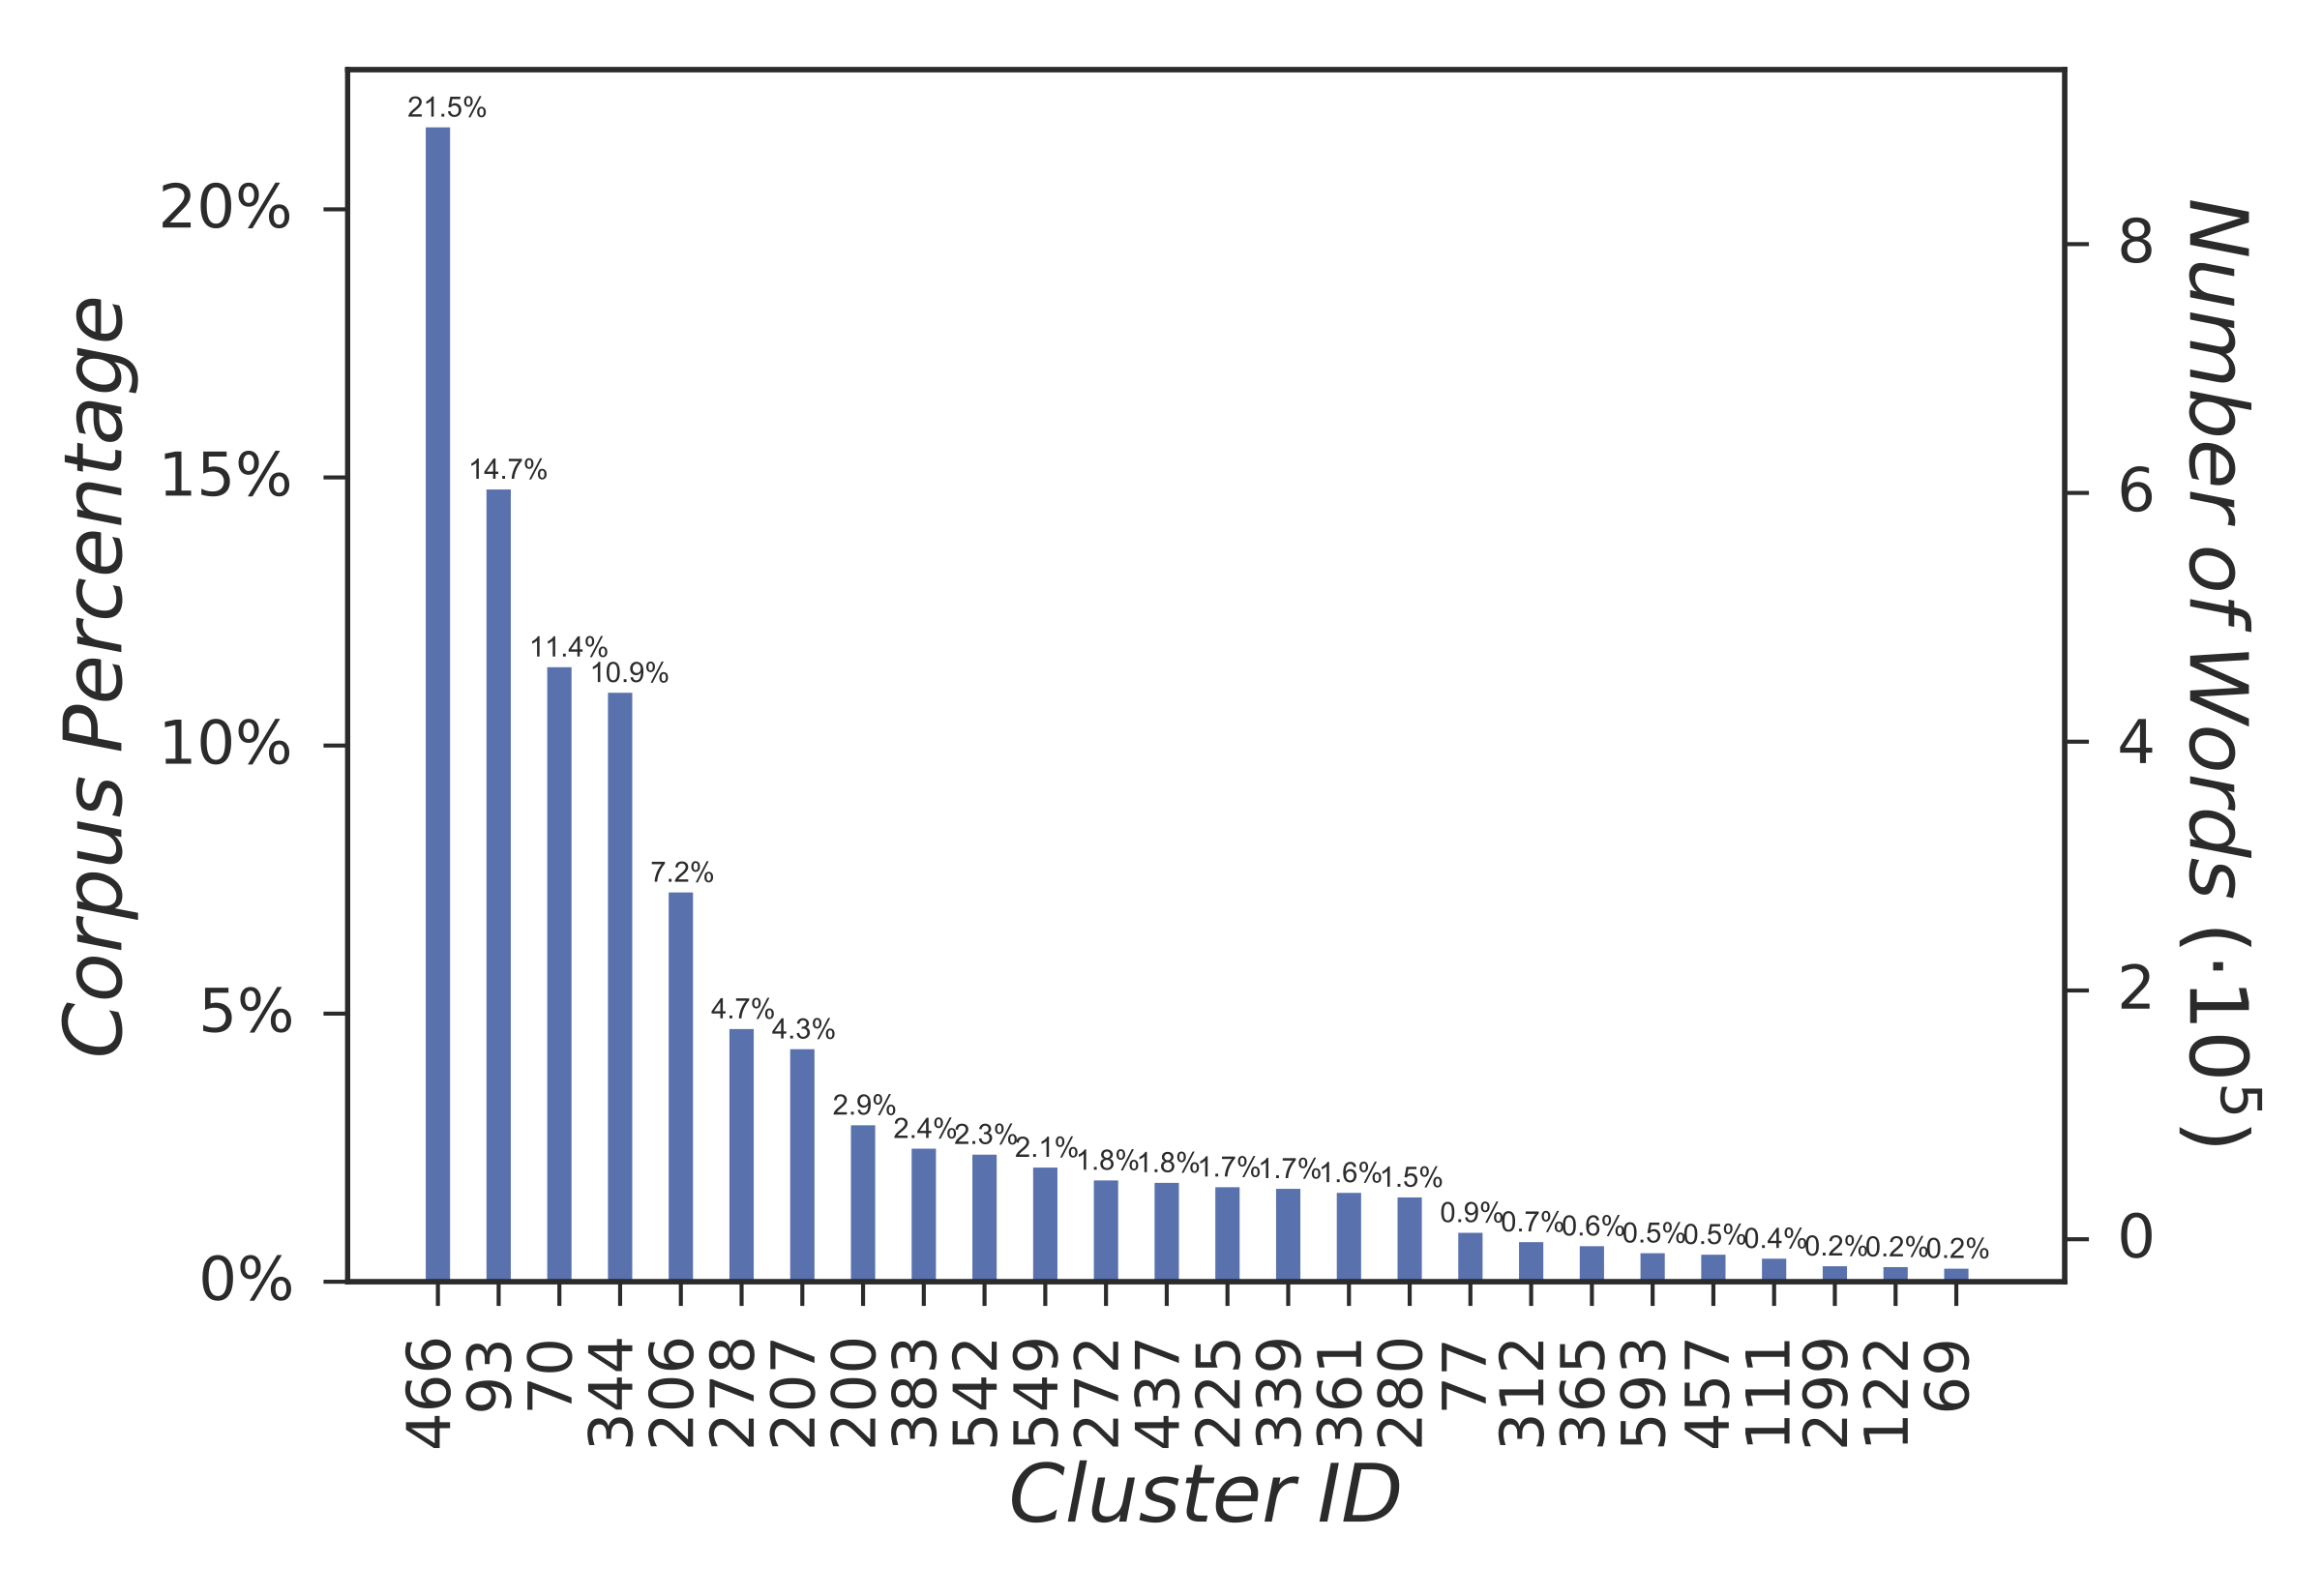 Absolute and relative number of word occurrences (right) and vocabulary size (left) per cluster.